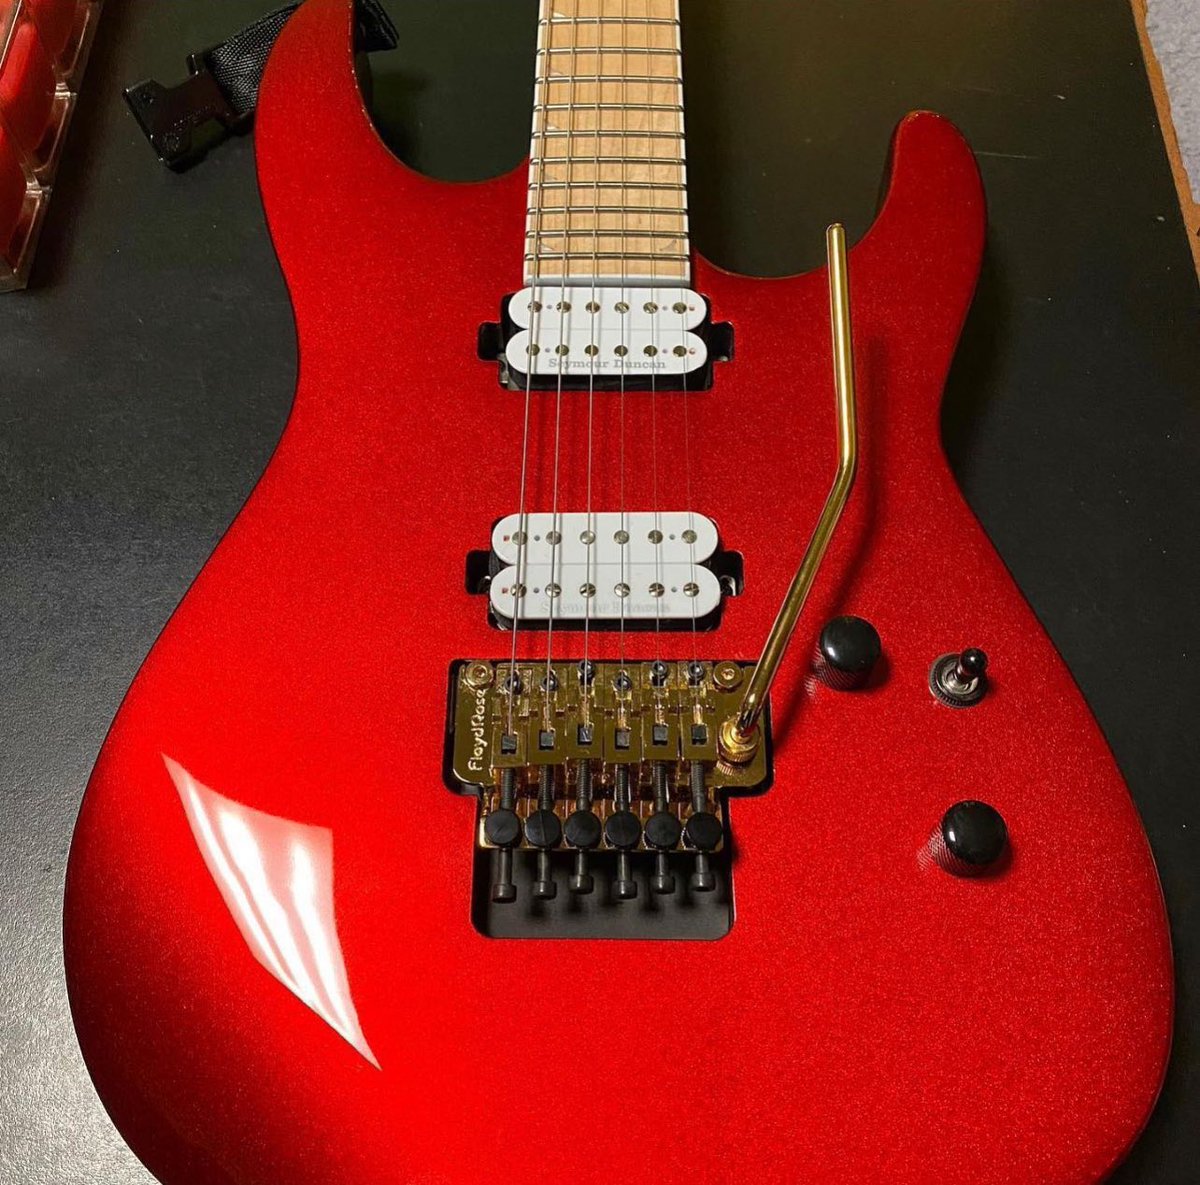 Love a red guitar with gold Floyd Rose tremolo #redguitar #jacksonguitars #floydrose #floydrosetremolo Thx for the tag @deadcitycrown_bonk